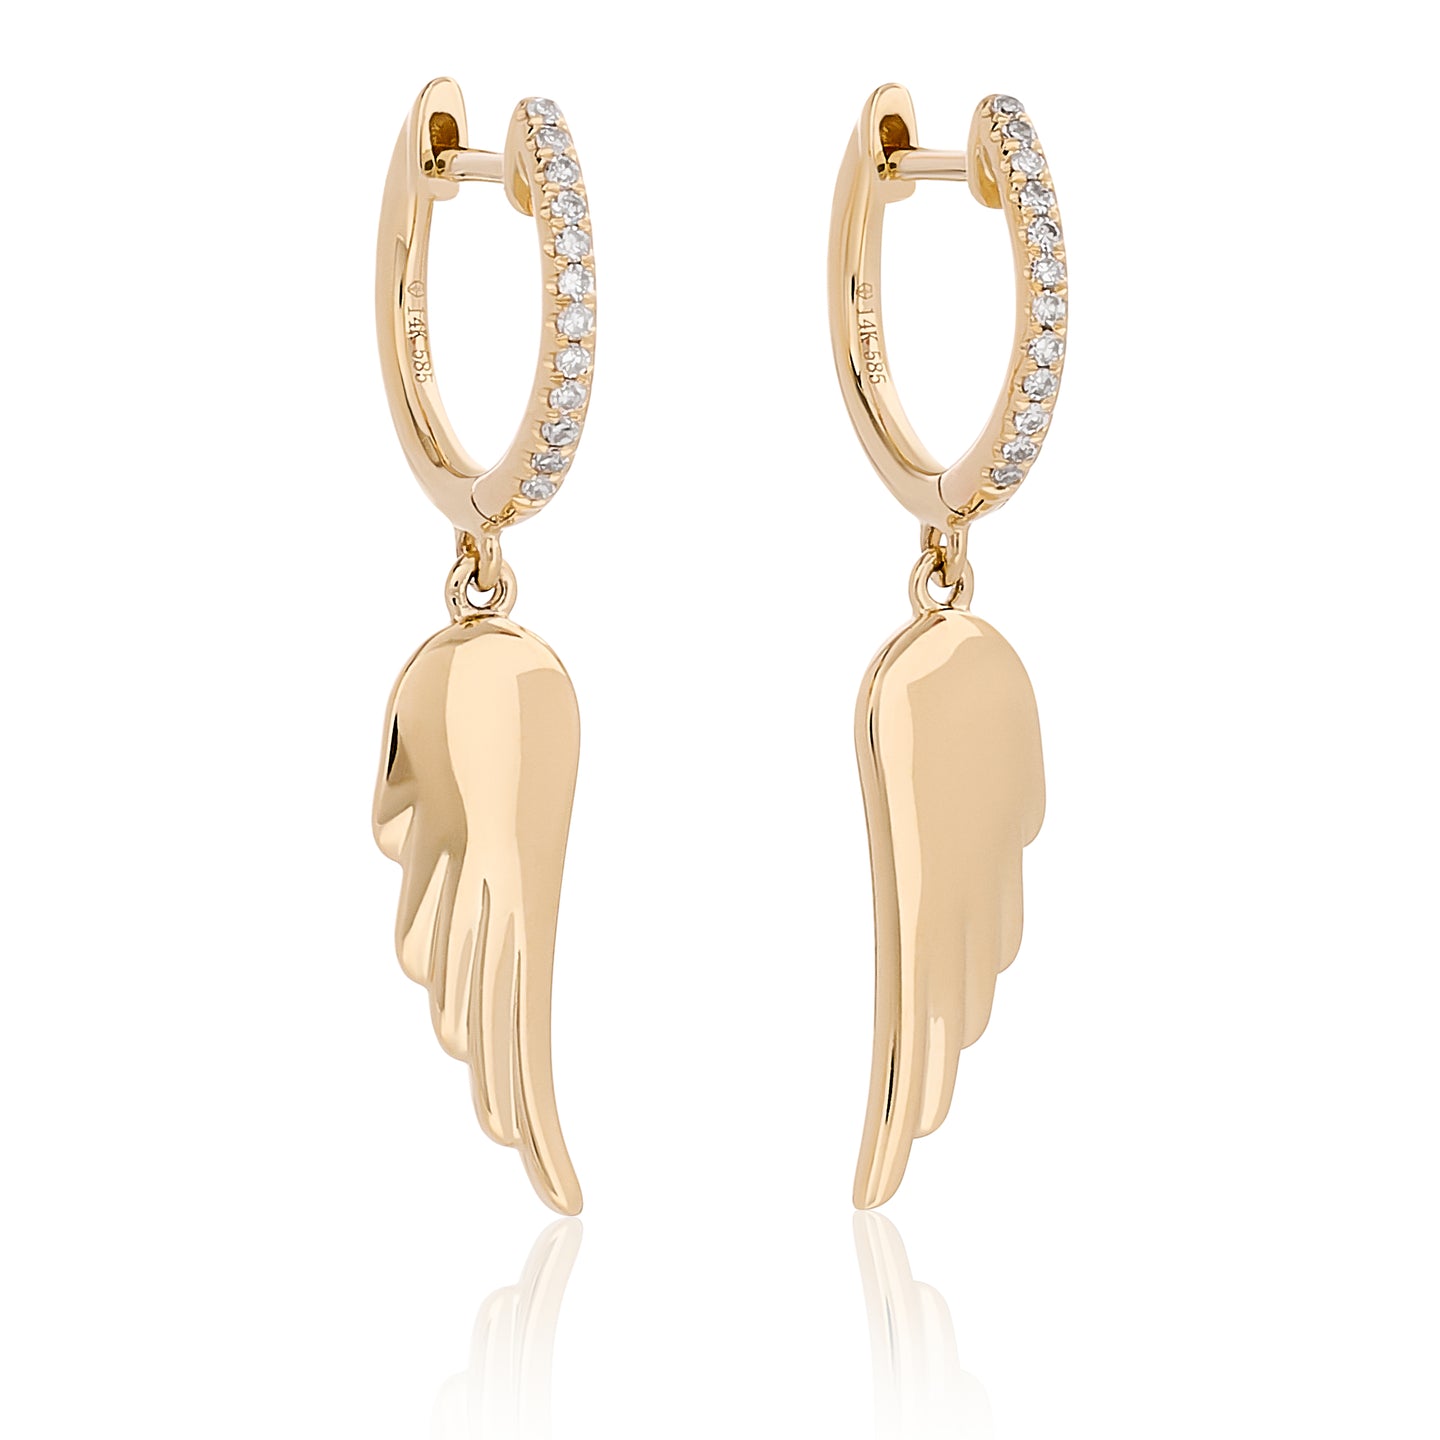 Petite Diamond and Gold Angel Wing Earrings